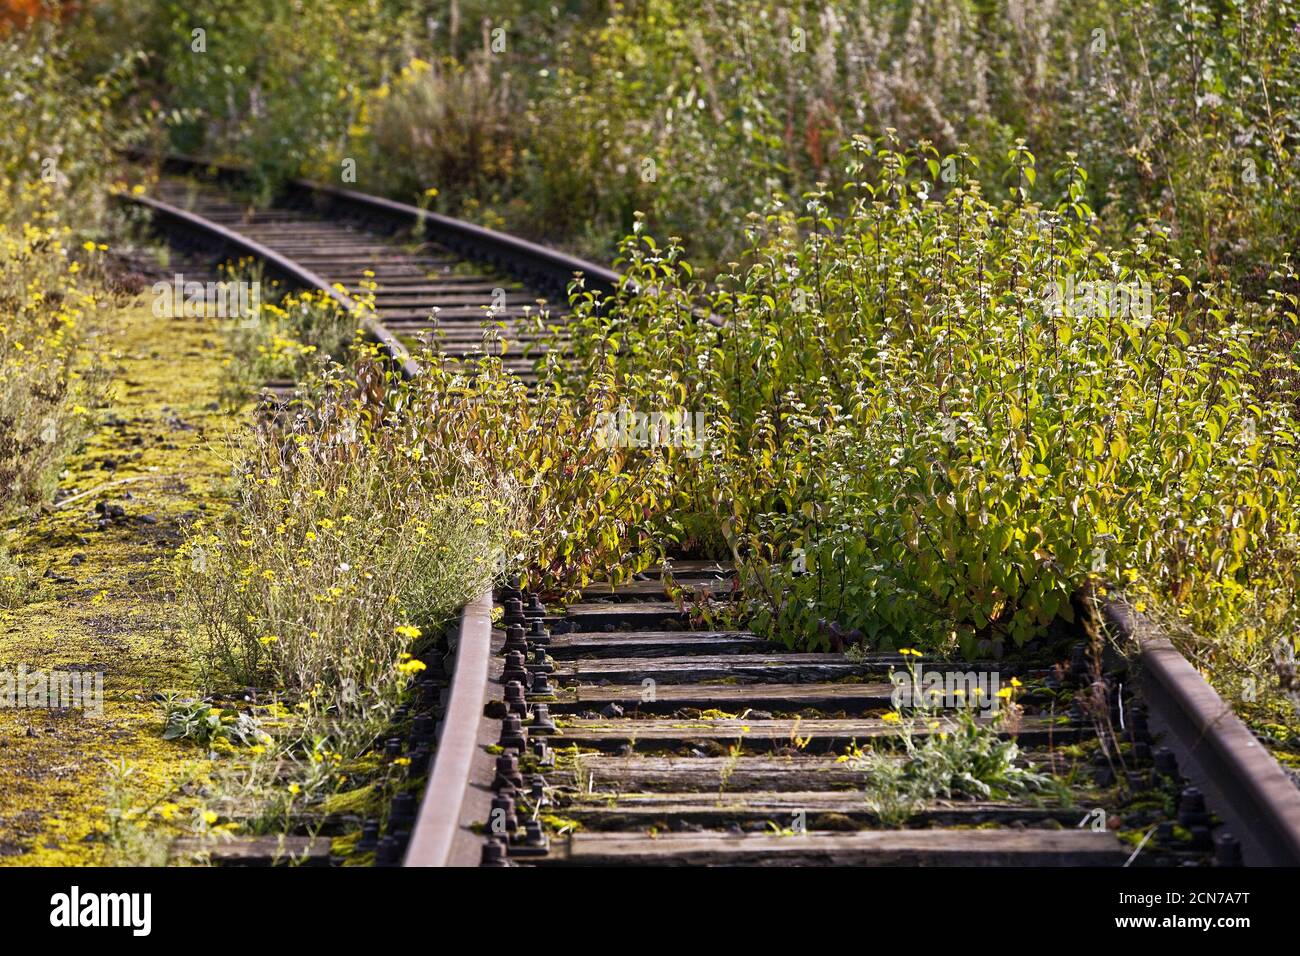 Overgrown tracks, industrial nature in the Duisburg-Nord landscape park, Duisburg, Germany, Europe Stock Photo